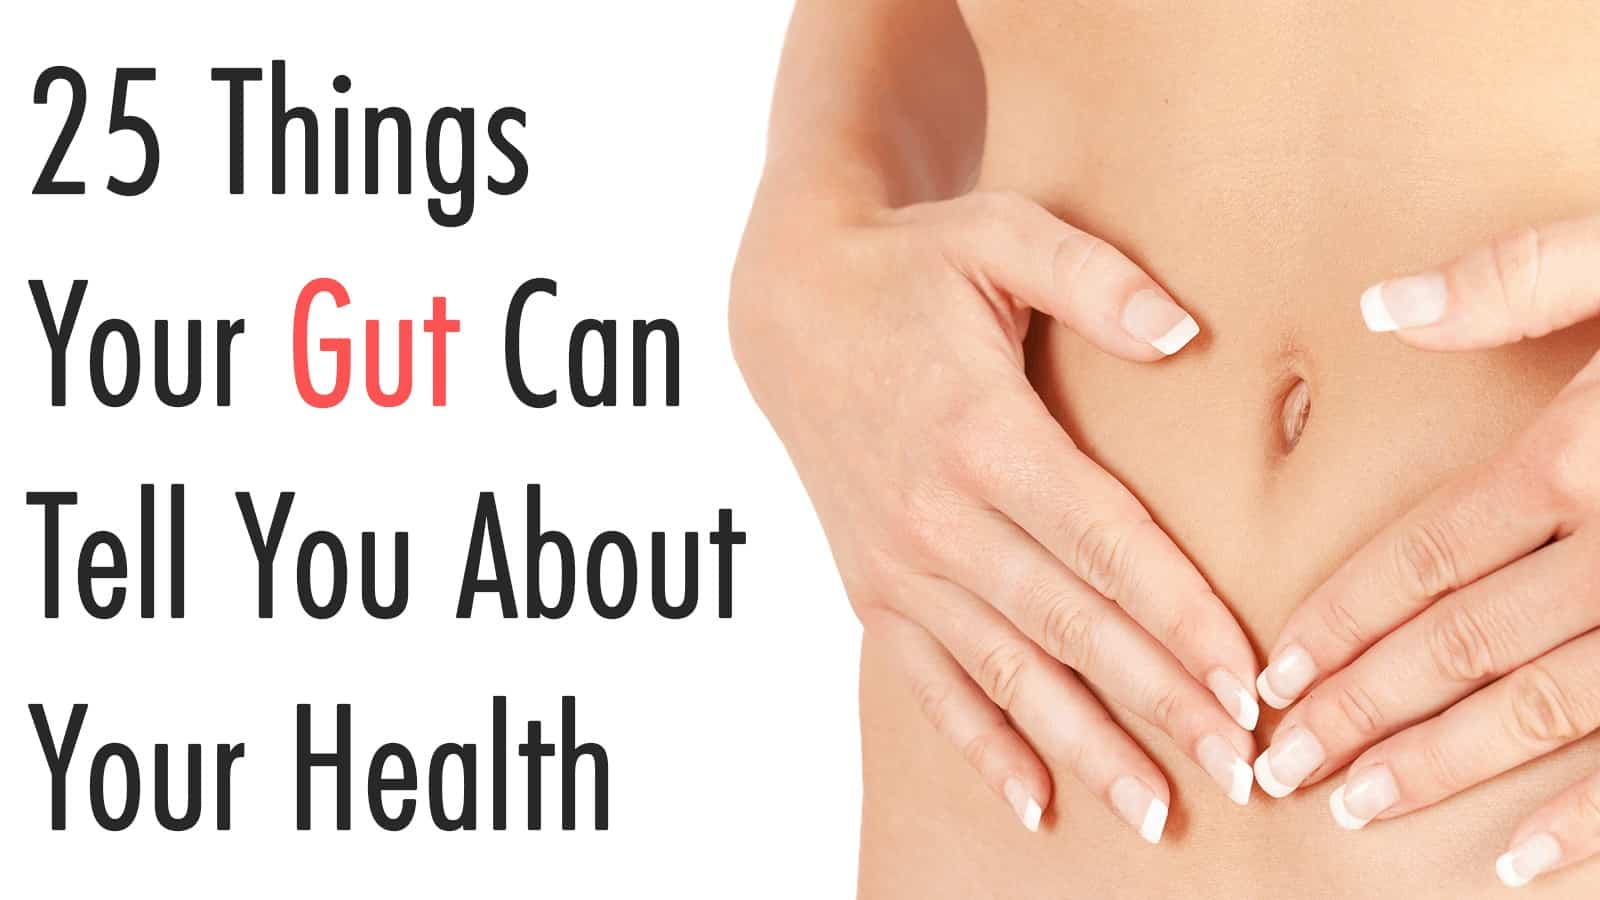 25 Things Your Gut Can Tell You About Your Health